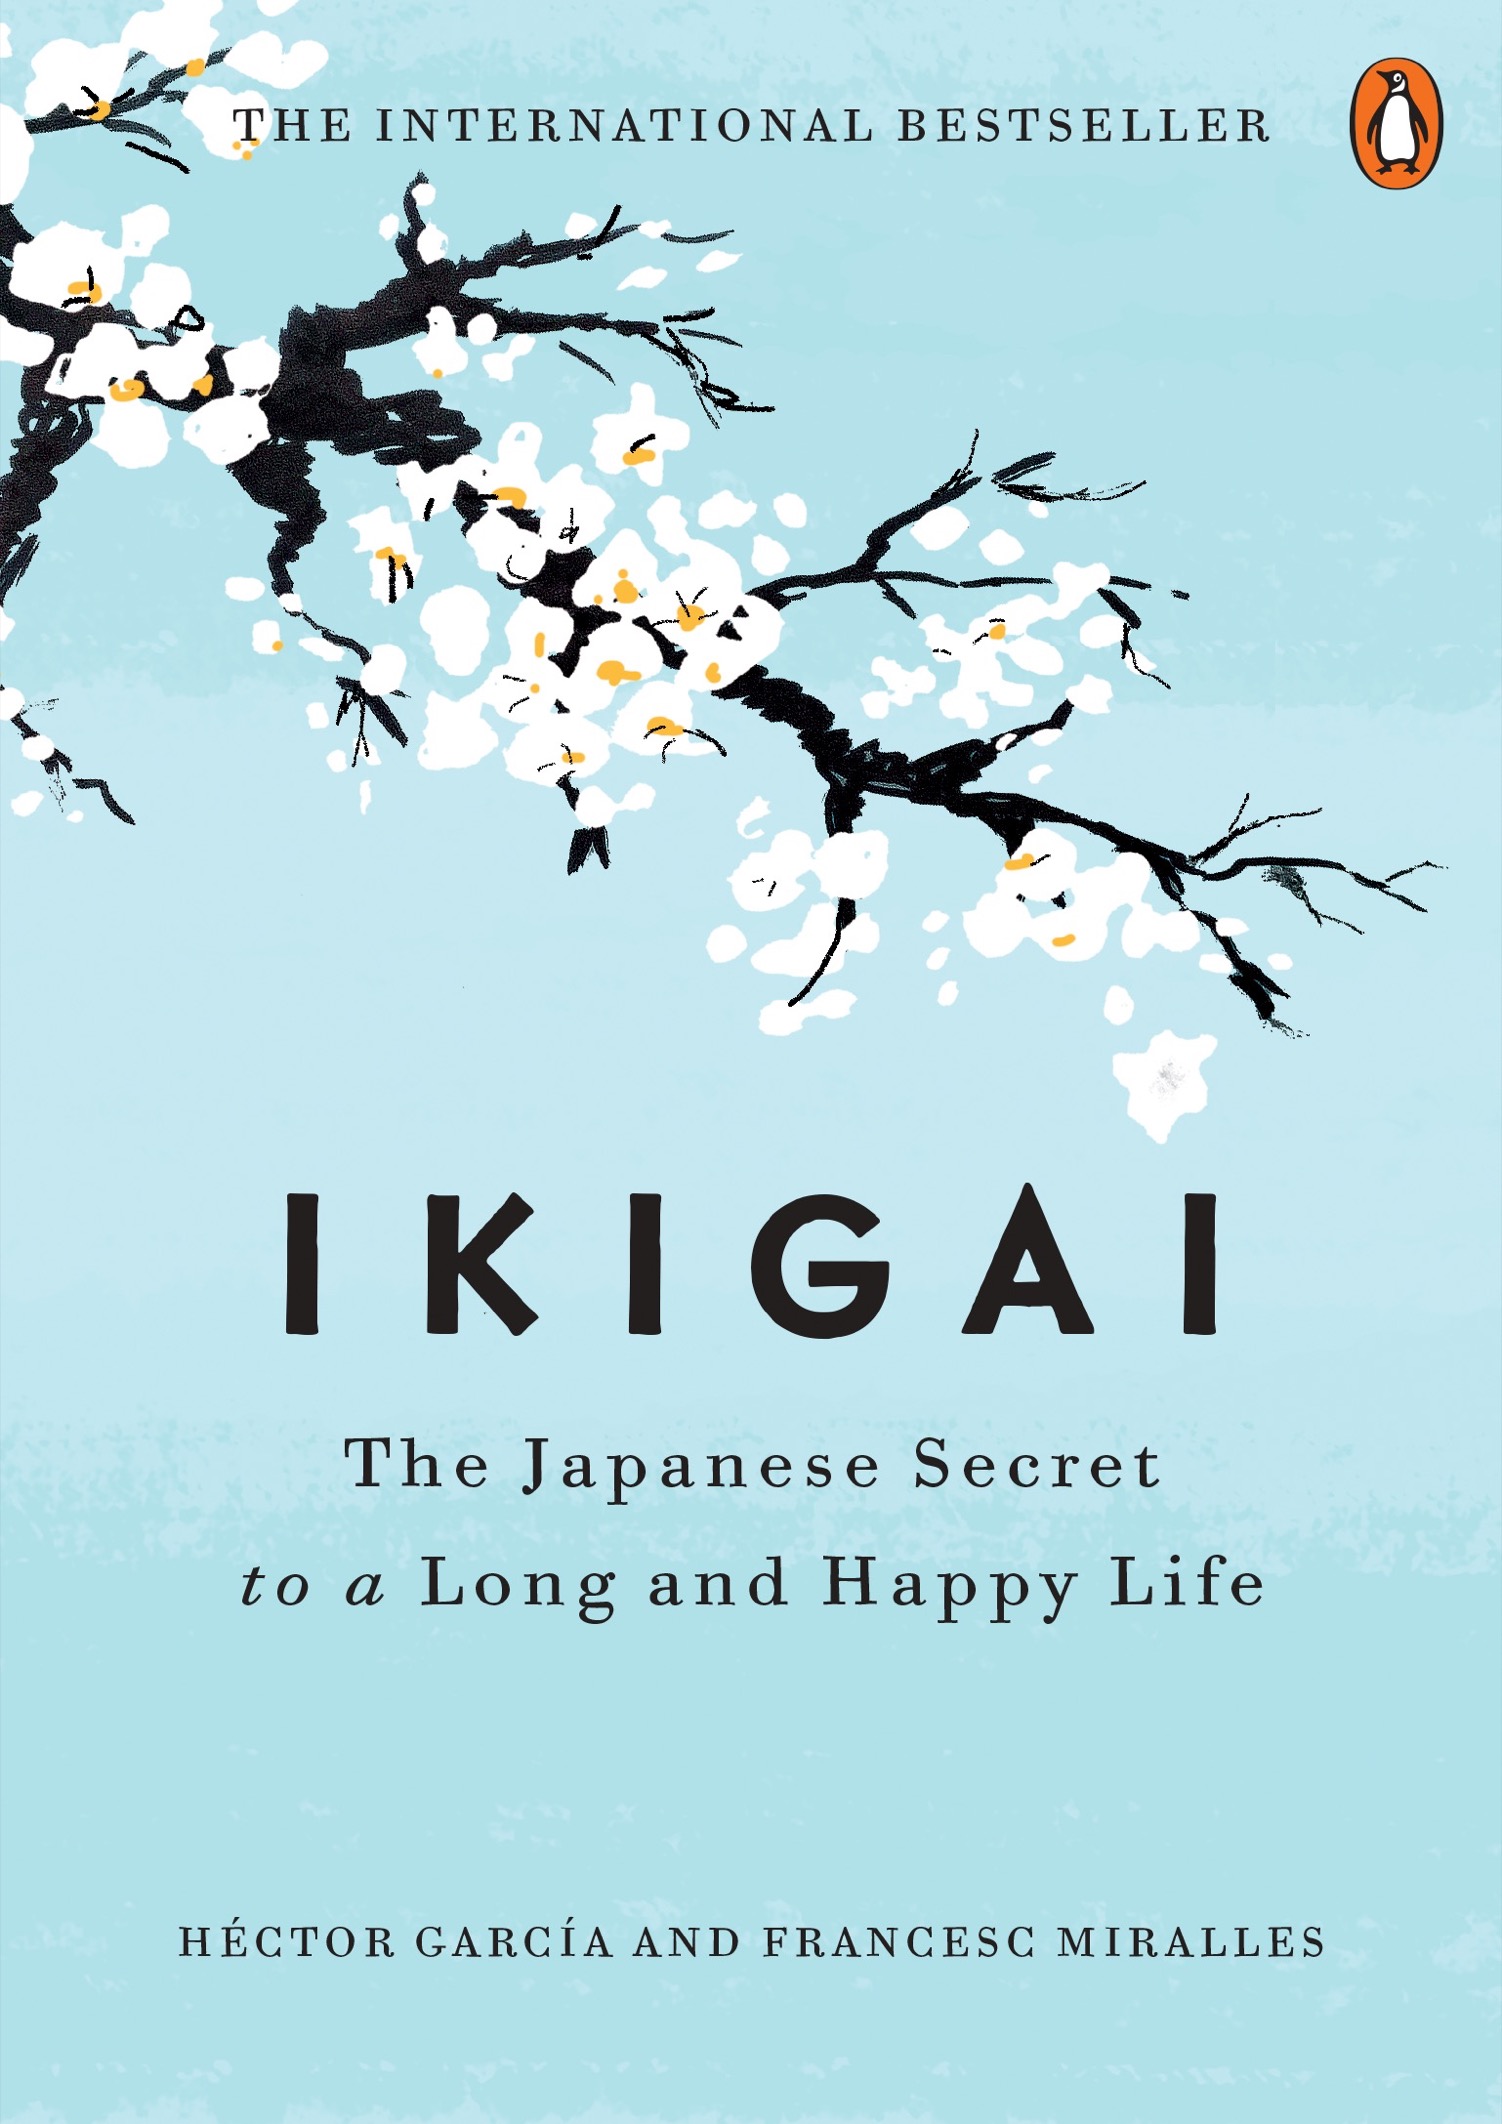 Ikigai part 1: The art of staying young while growing old